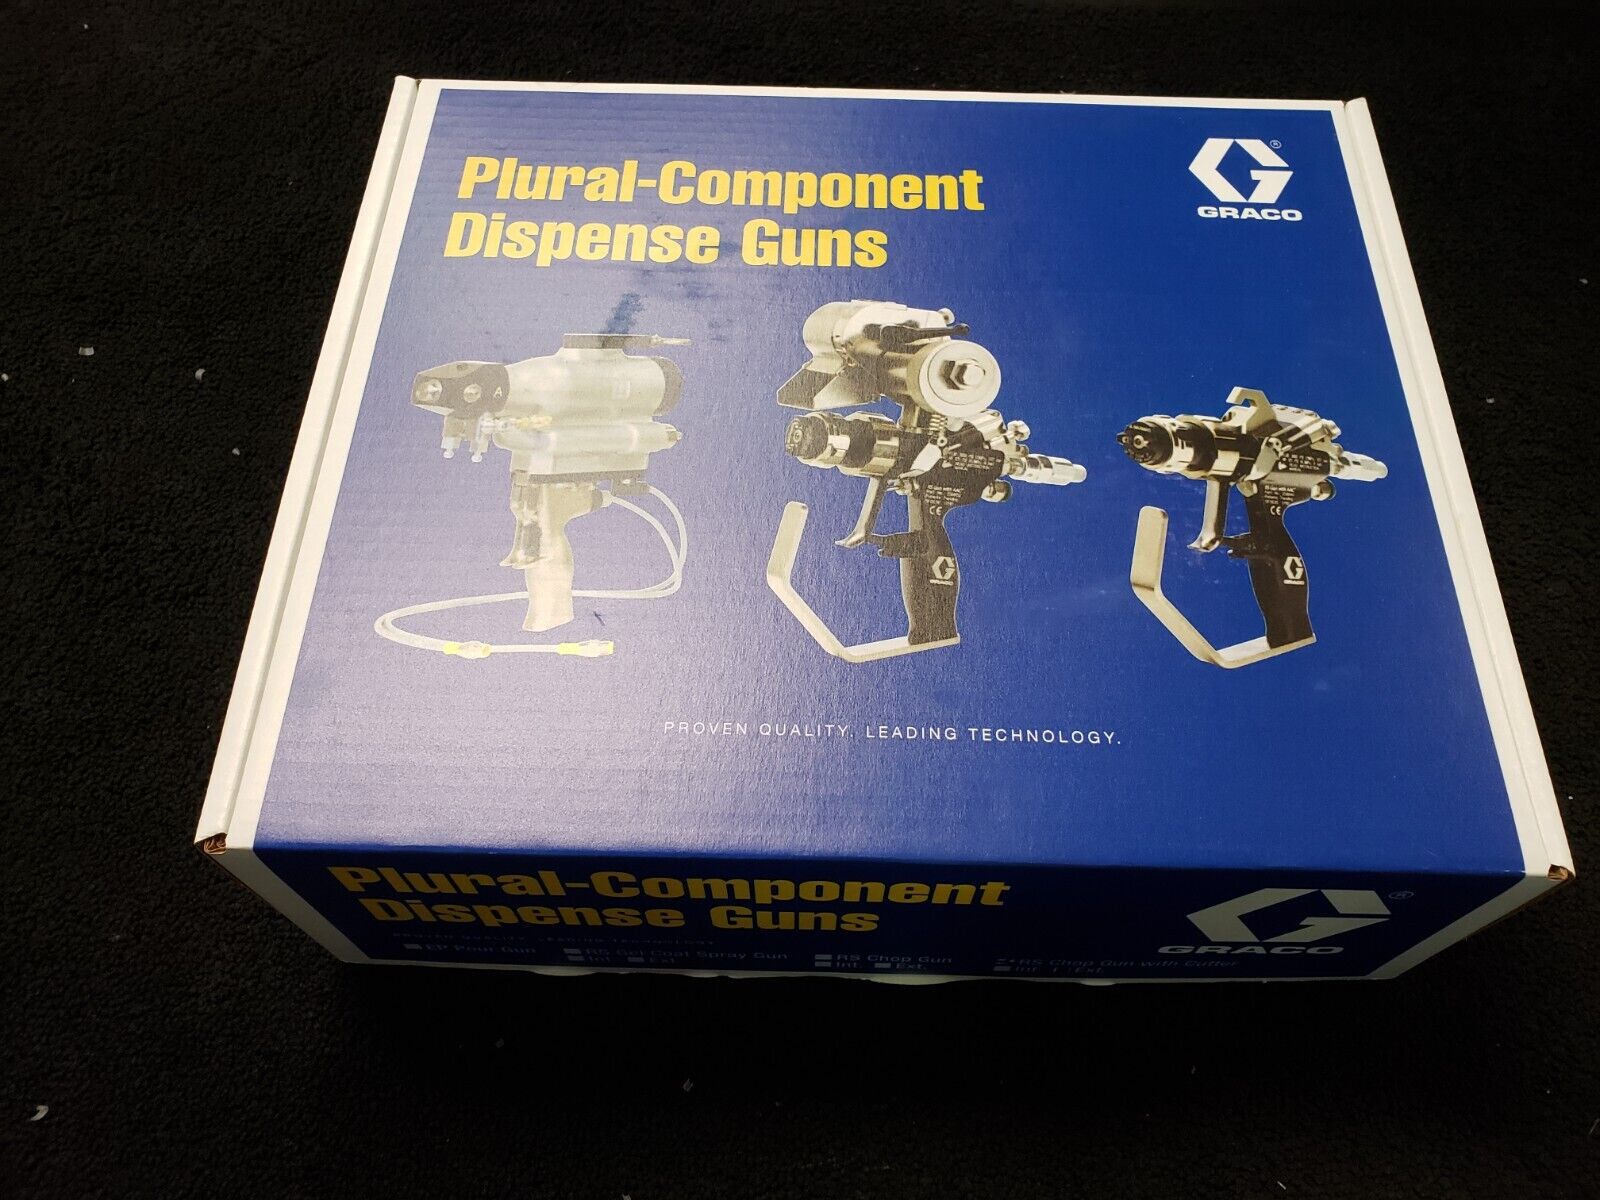 Graco External Plural Mix Spray Gun with Cutter and - 258970 | eBay